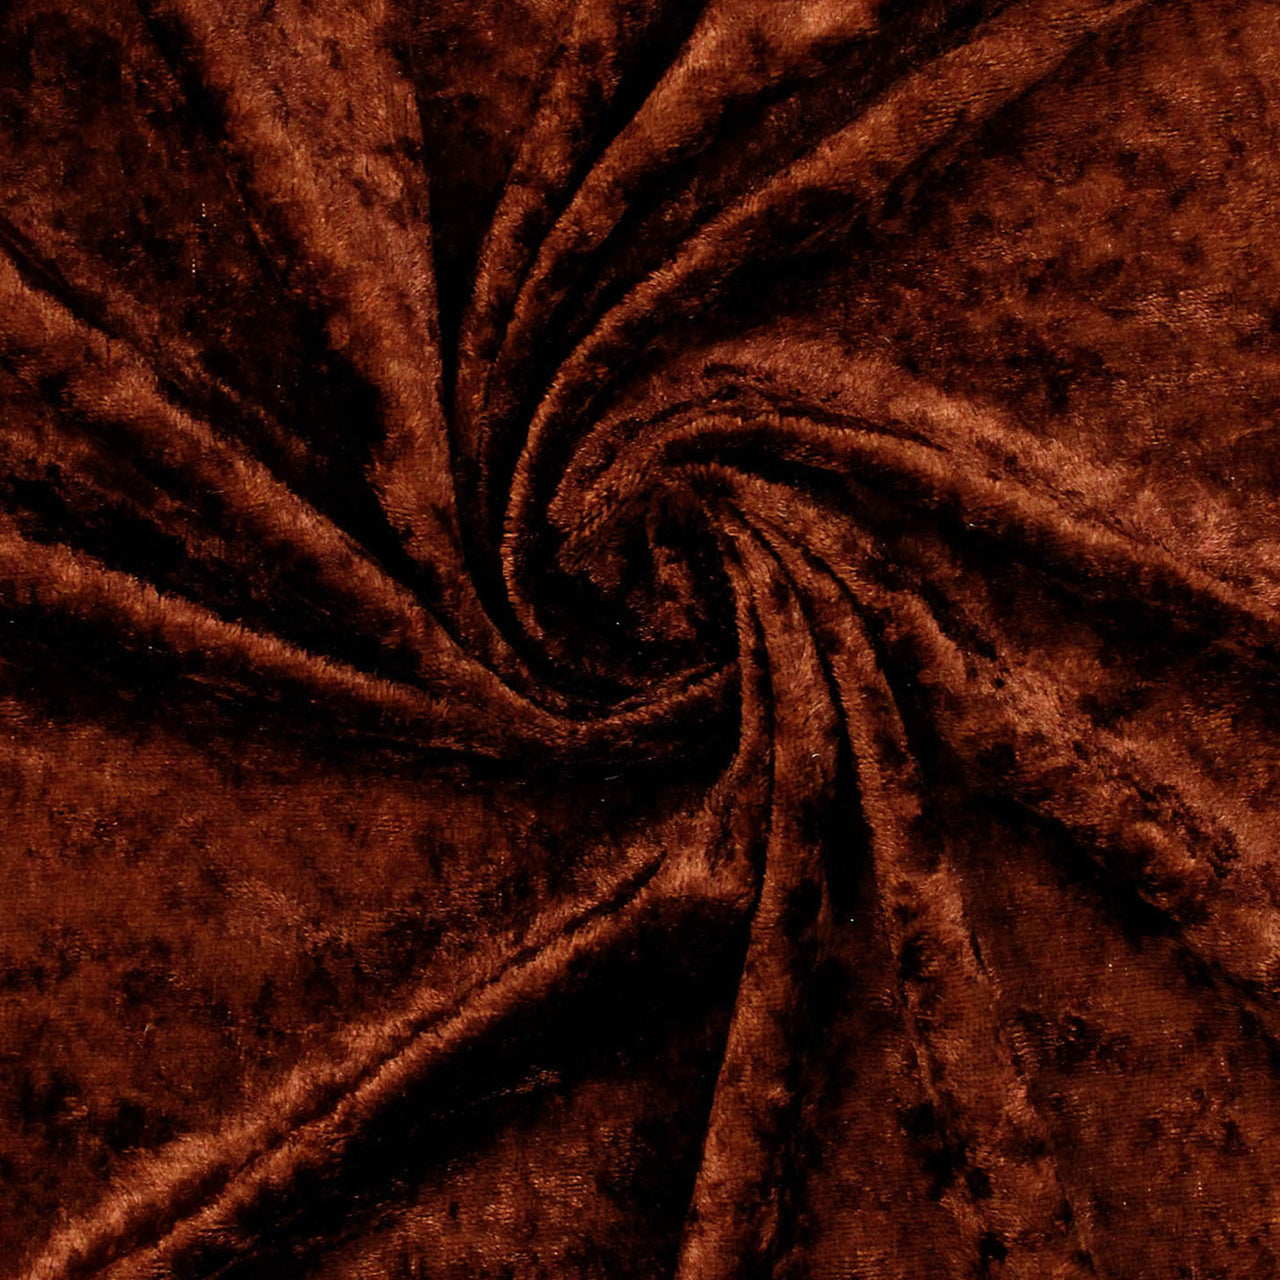 Brown - Crushed Velvet Velour Fabric - Natural One Way Stretch For Costumes & Drapes